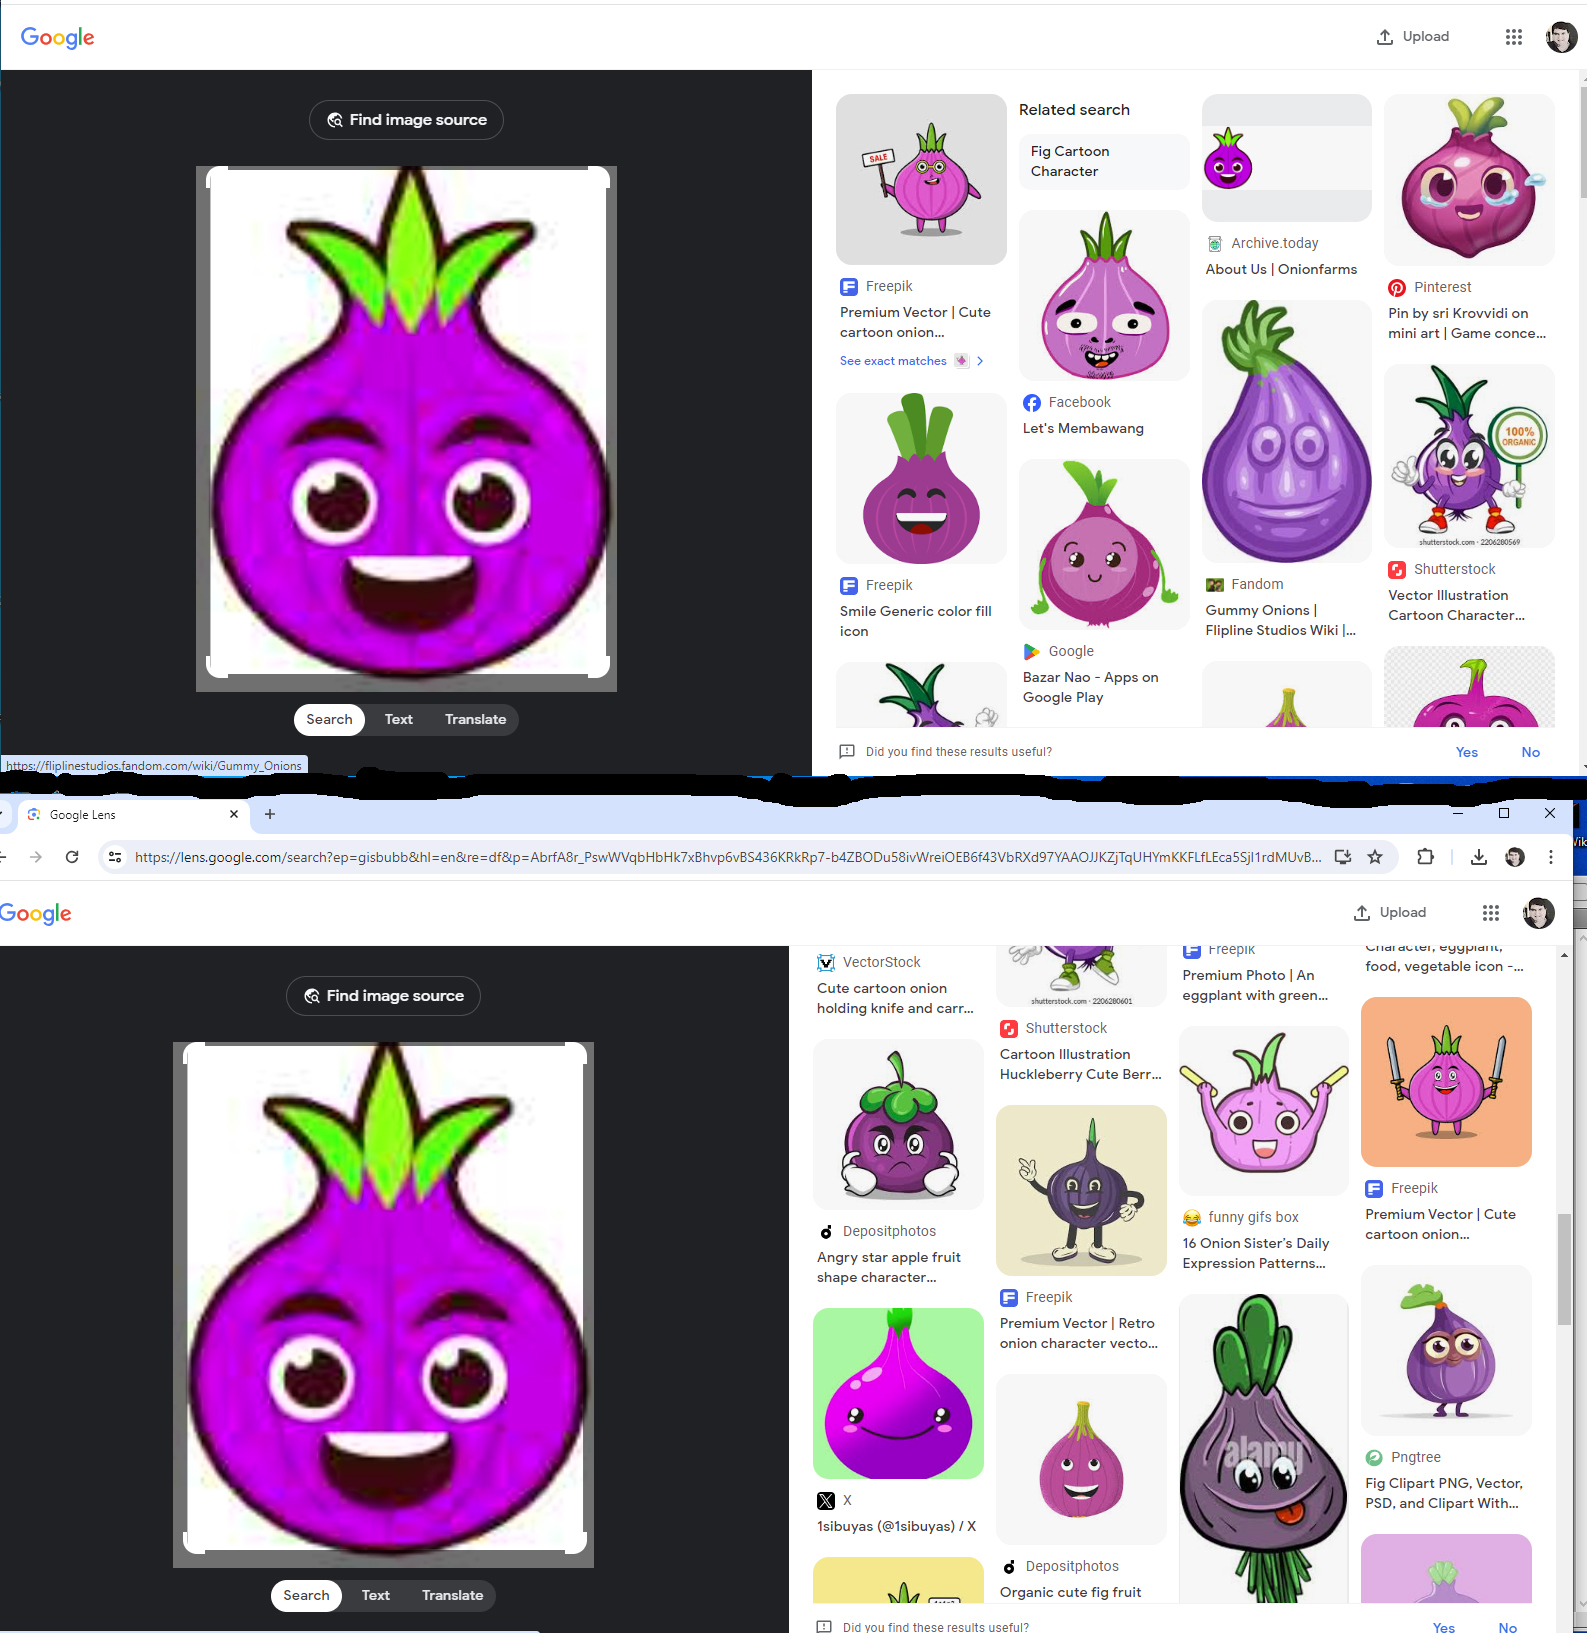 Problem with smiley onion.jpg